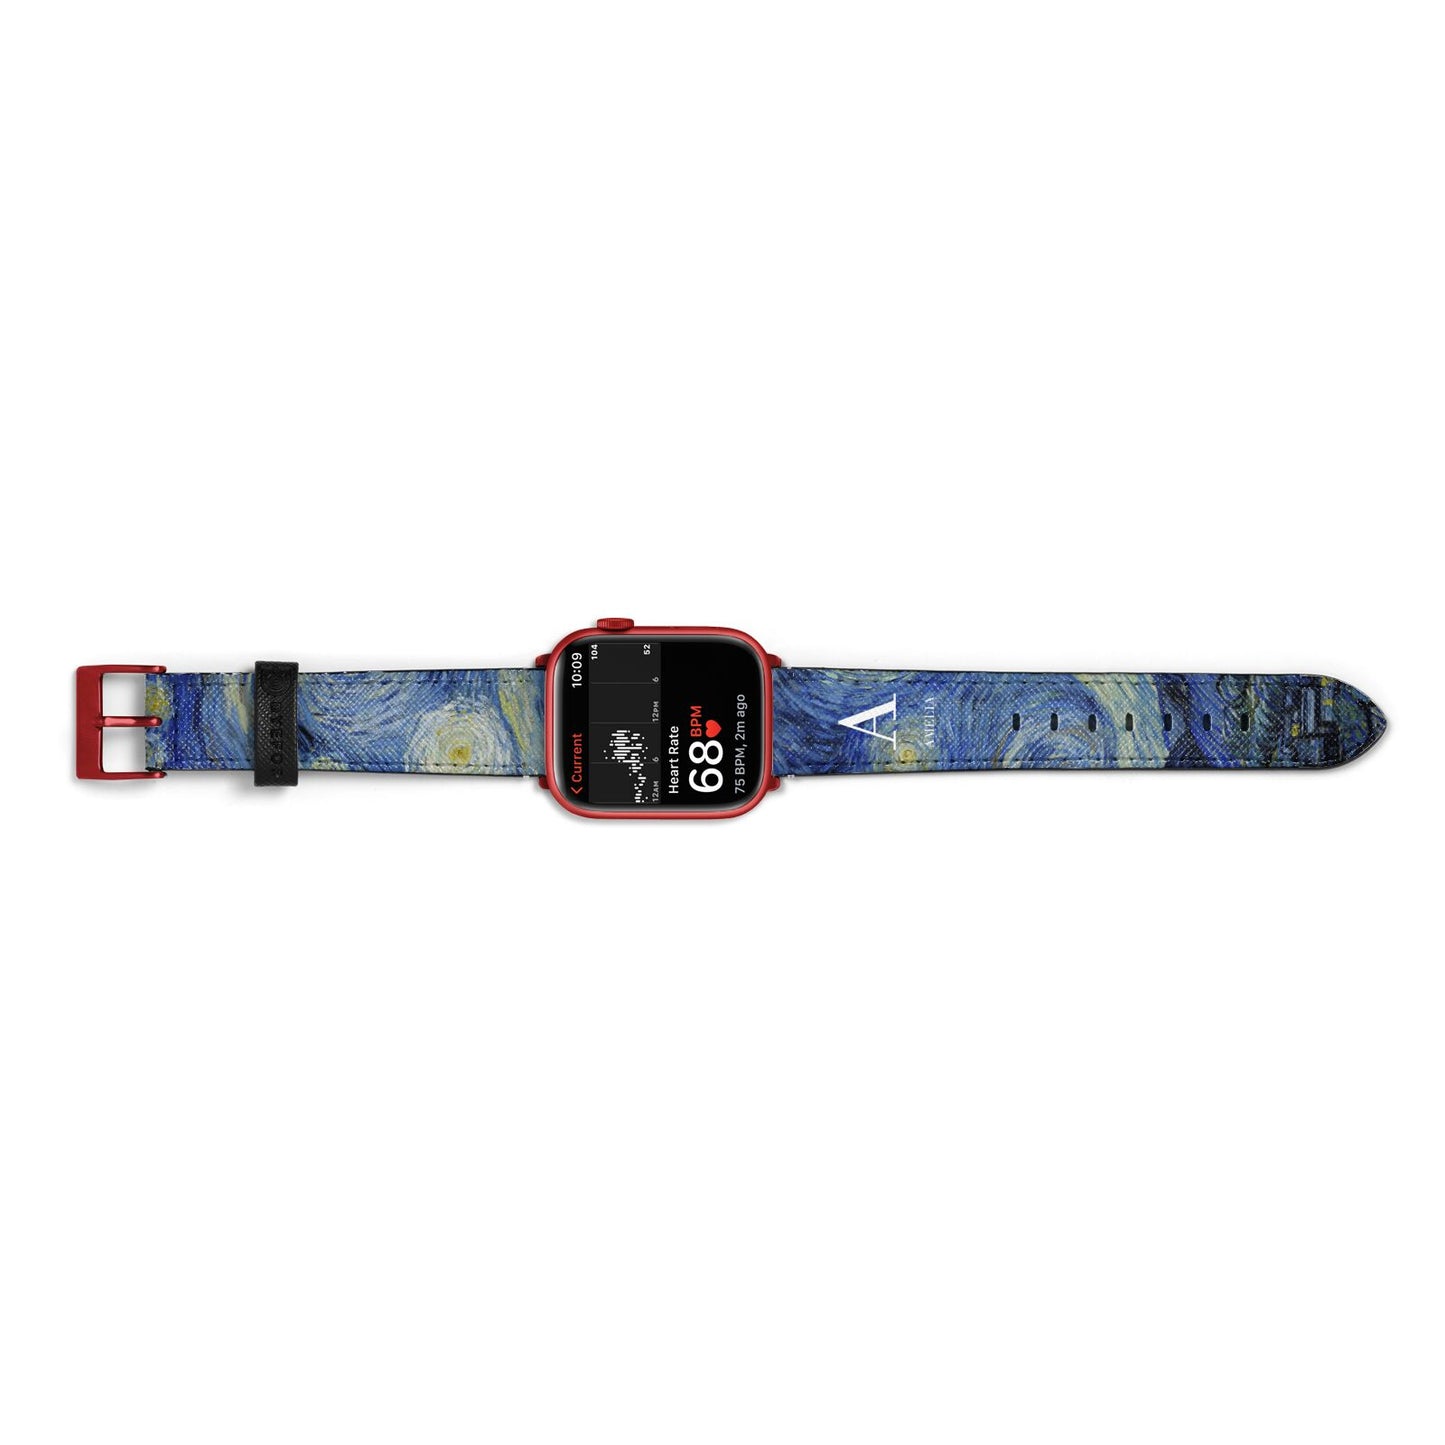 Personalised Van Gogh Starry Night Apple Watch Strap Size 38mm Landscape Image Red Hardware